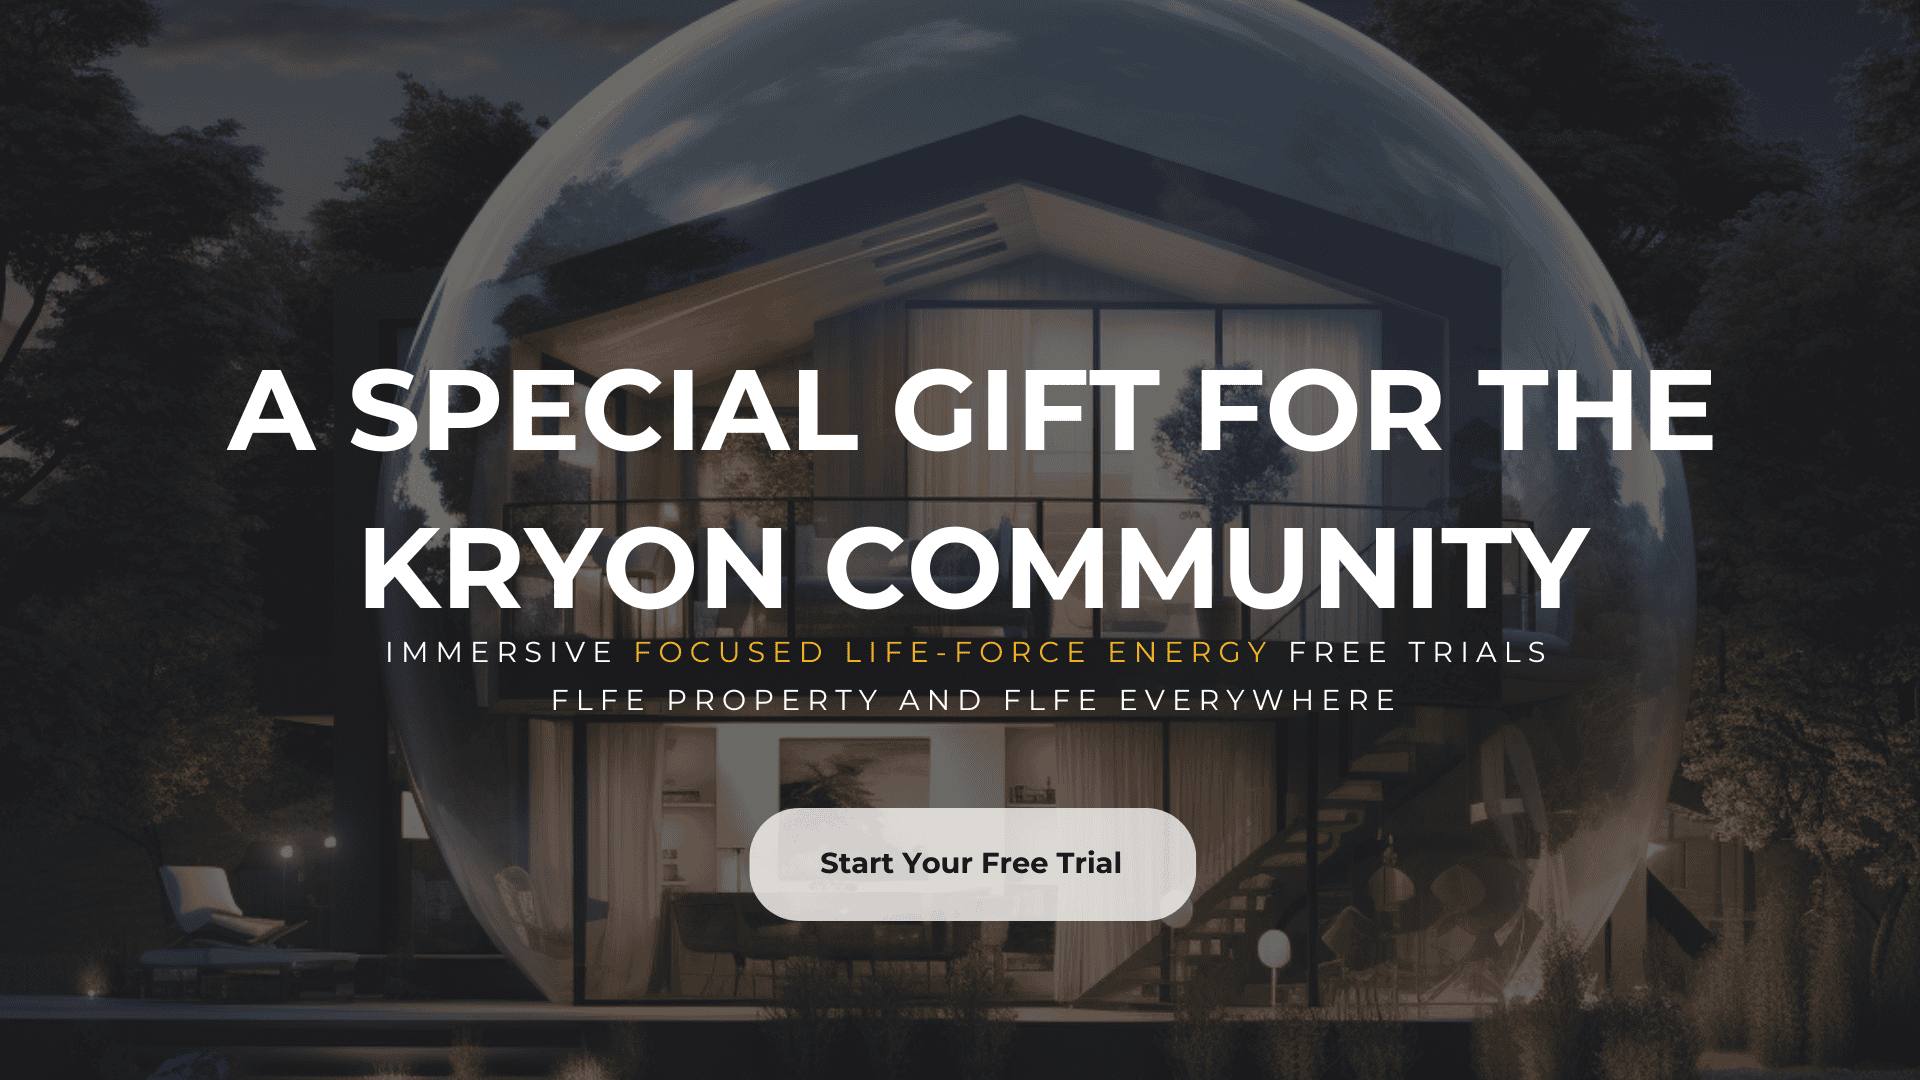 SPECIAL GIFT KRYON COMMUNITY